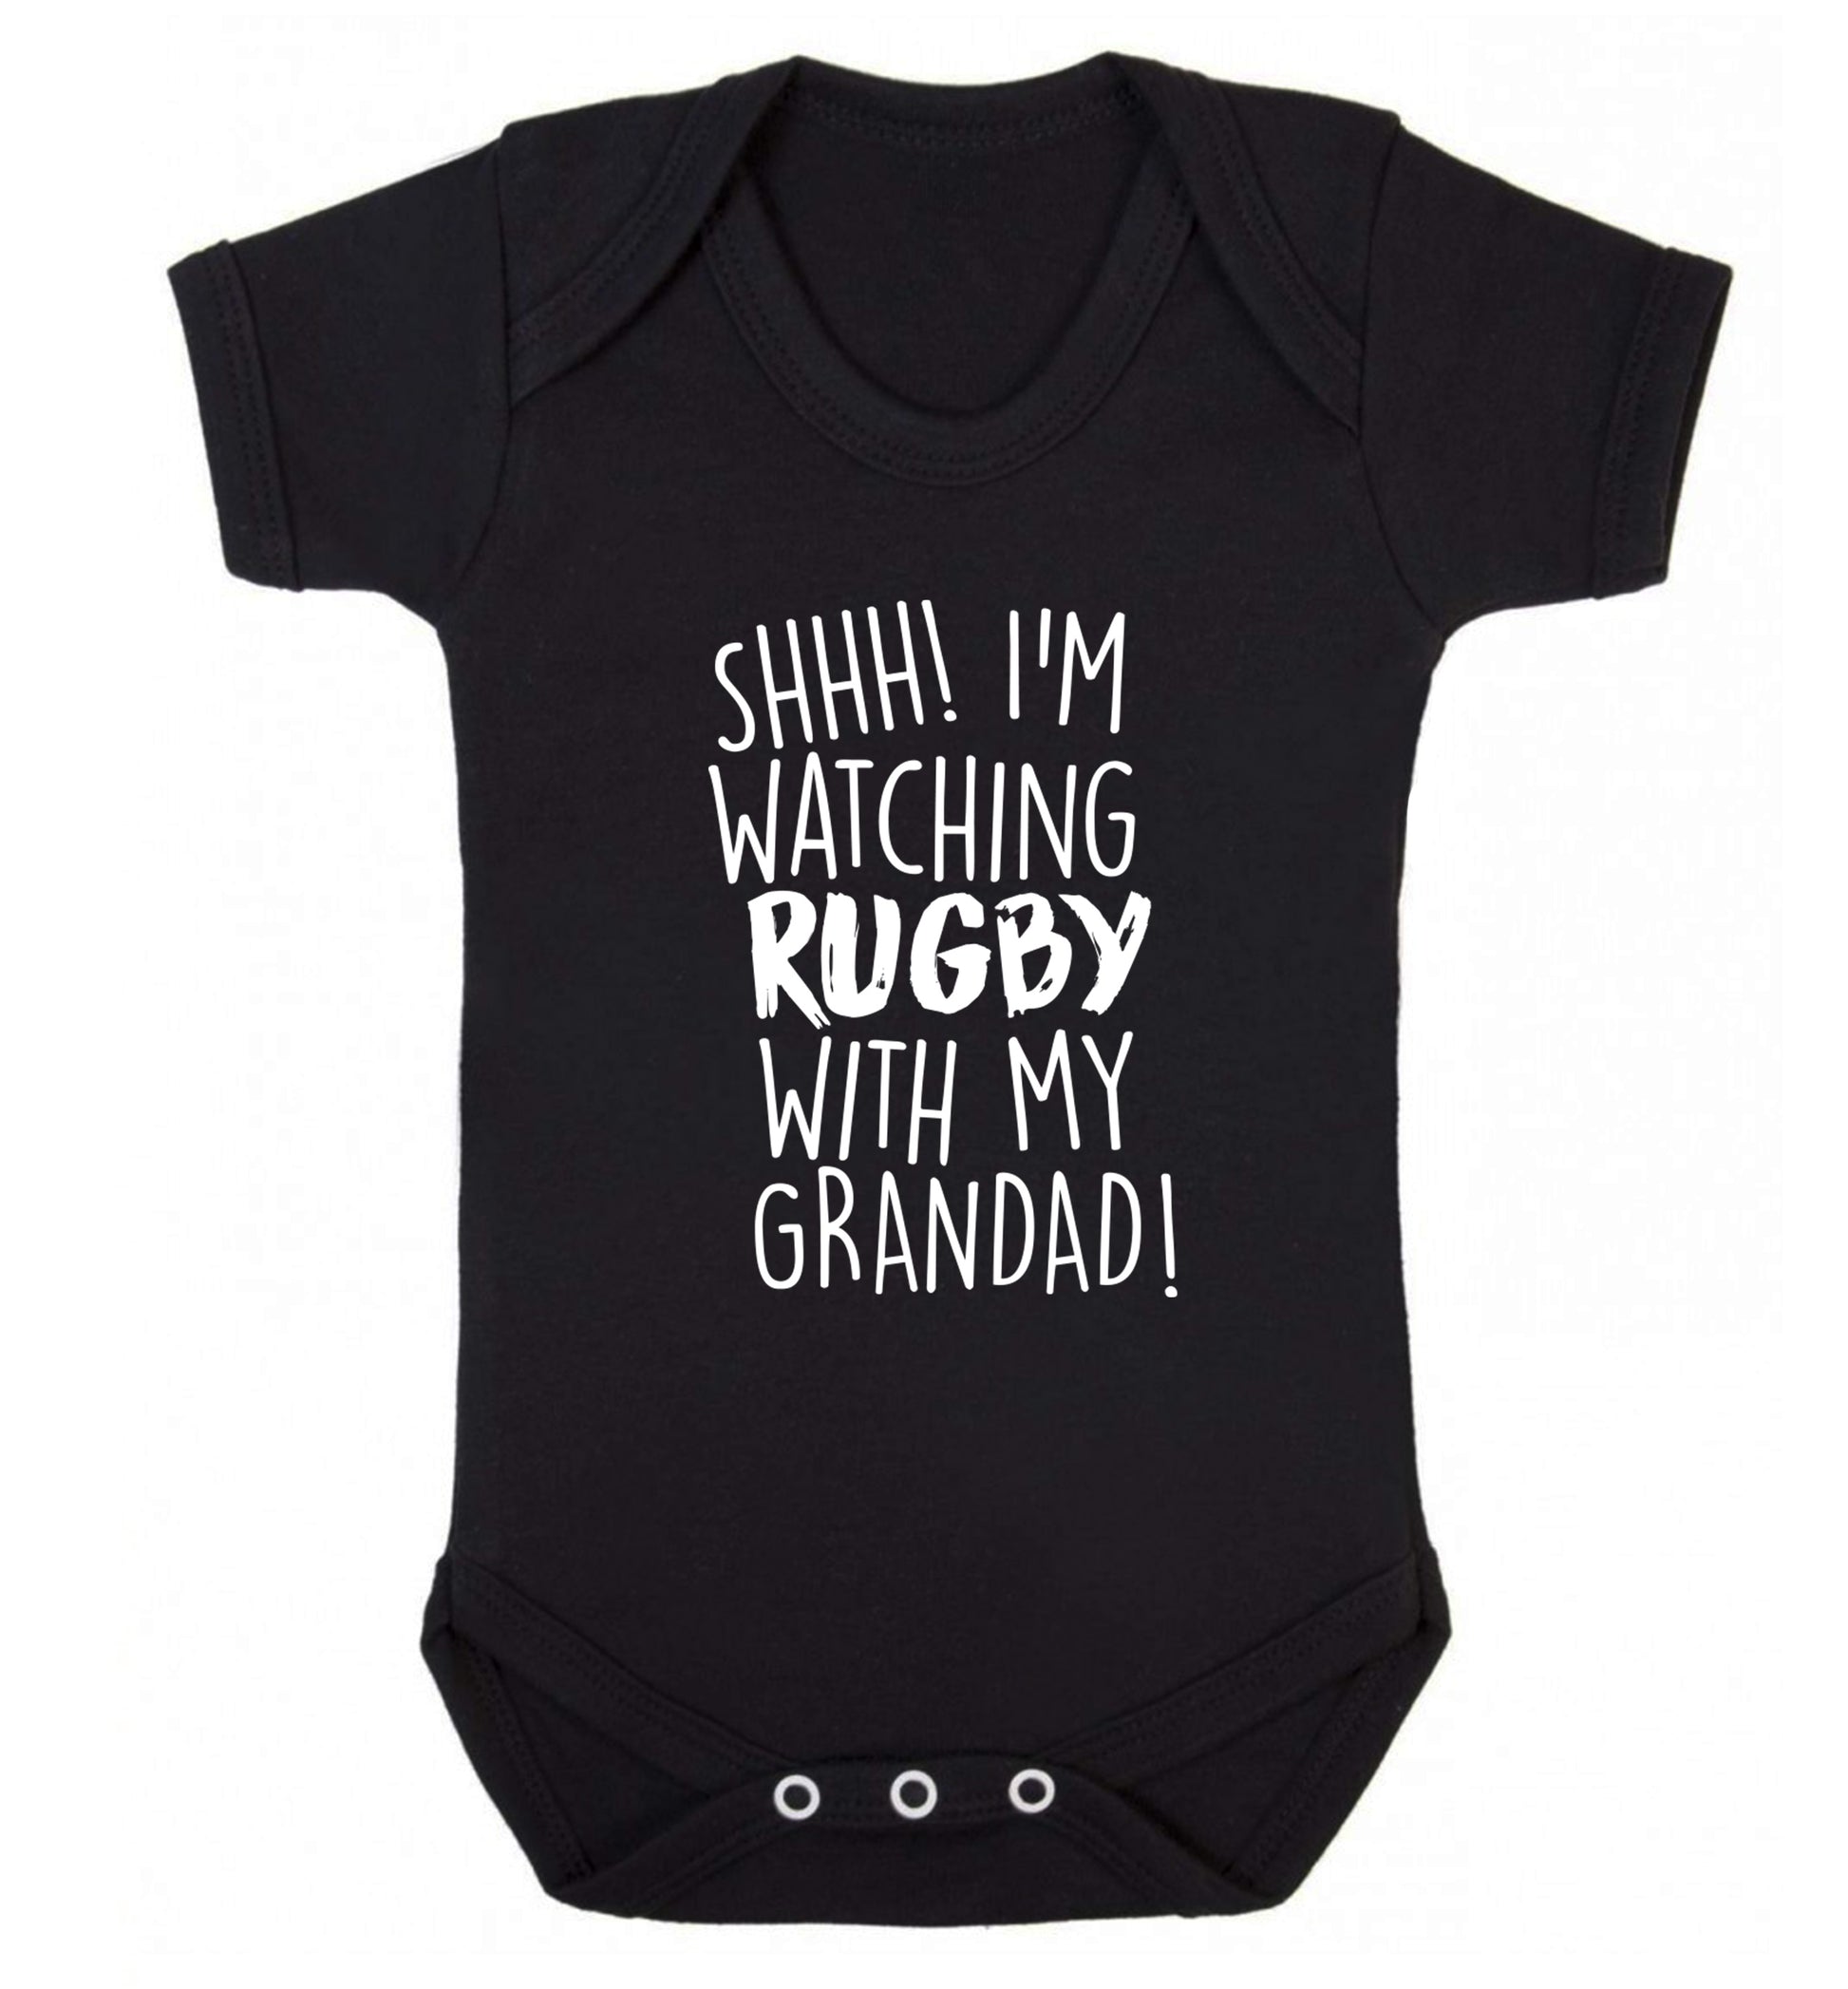 Shh I'm watching rugby with my grandaughter Baby Vest black 18-24 months